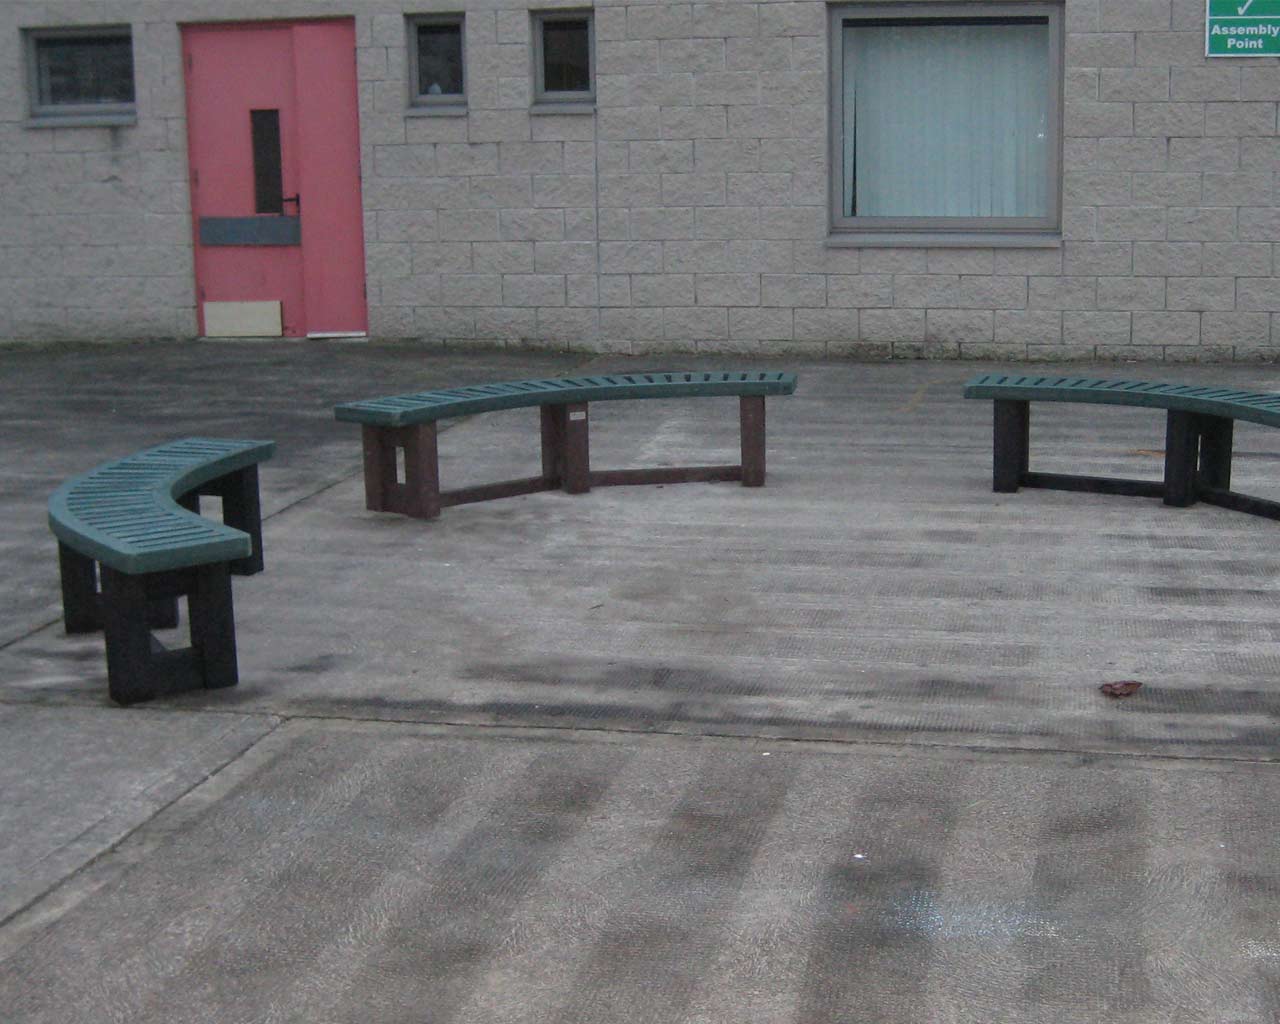 Semicircular Bench Without Back